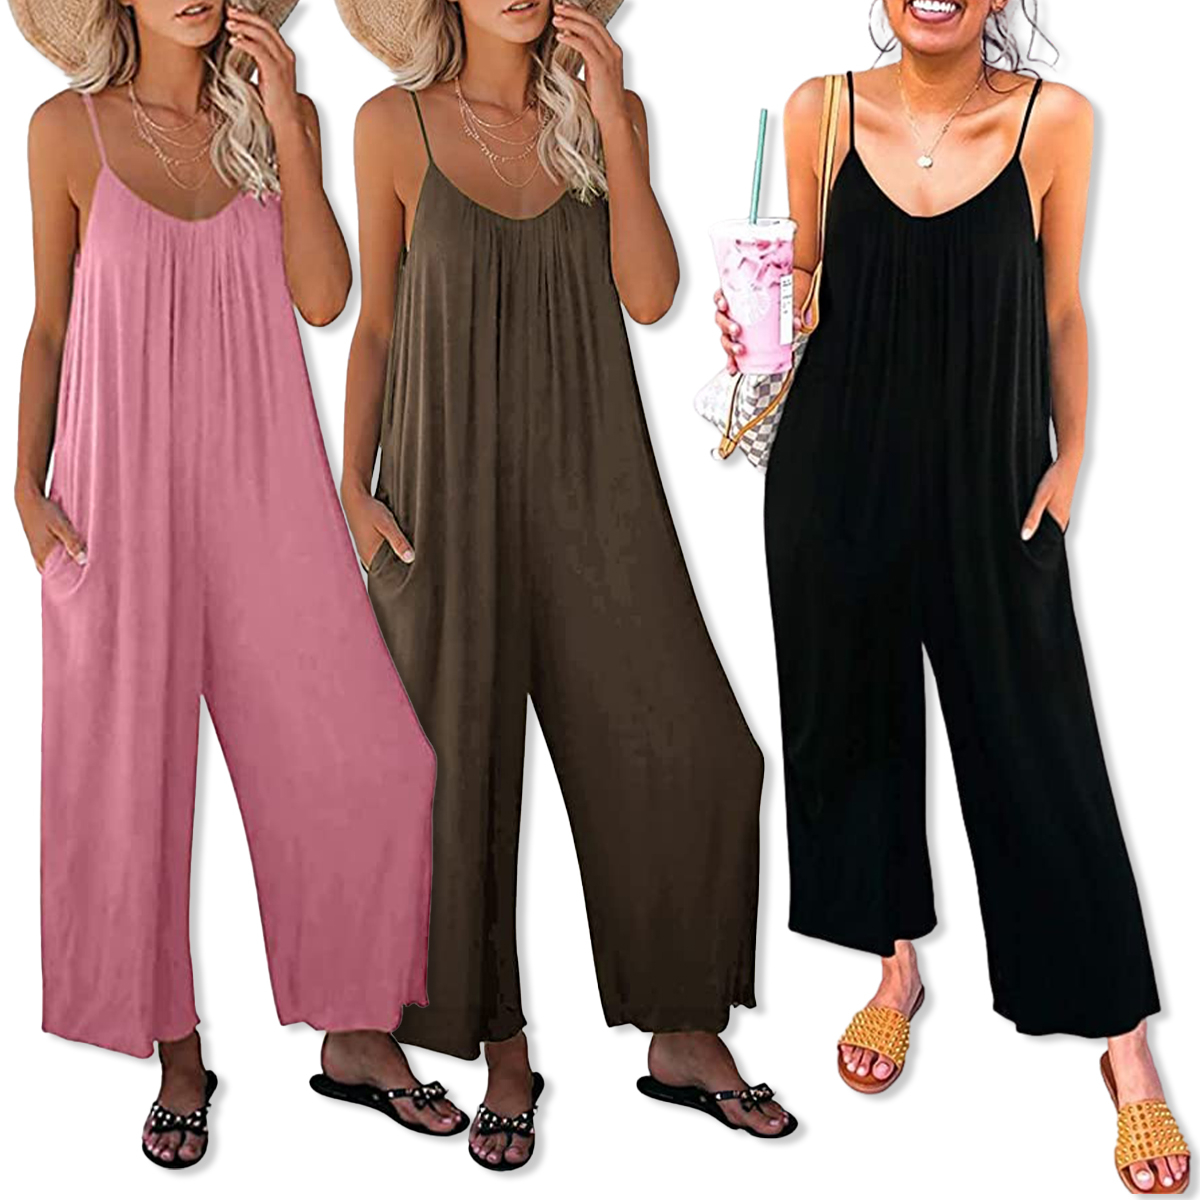 This Size-Inclusive Jumpsuit Is on Sale for $27 for Amazon Prime Day